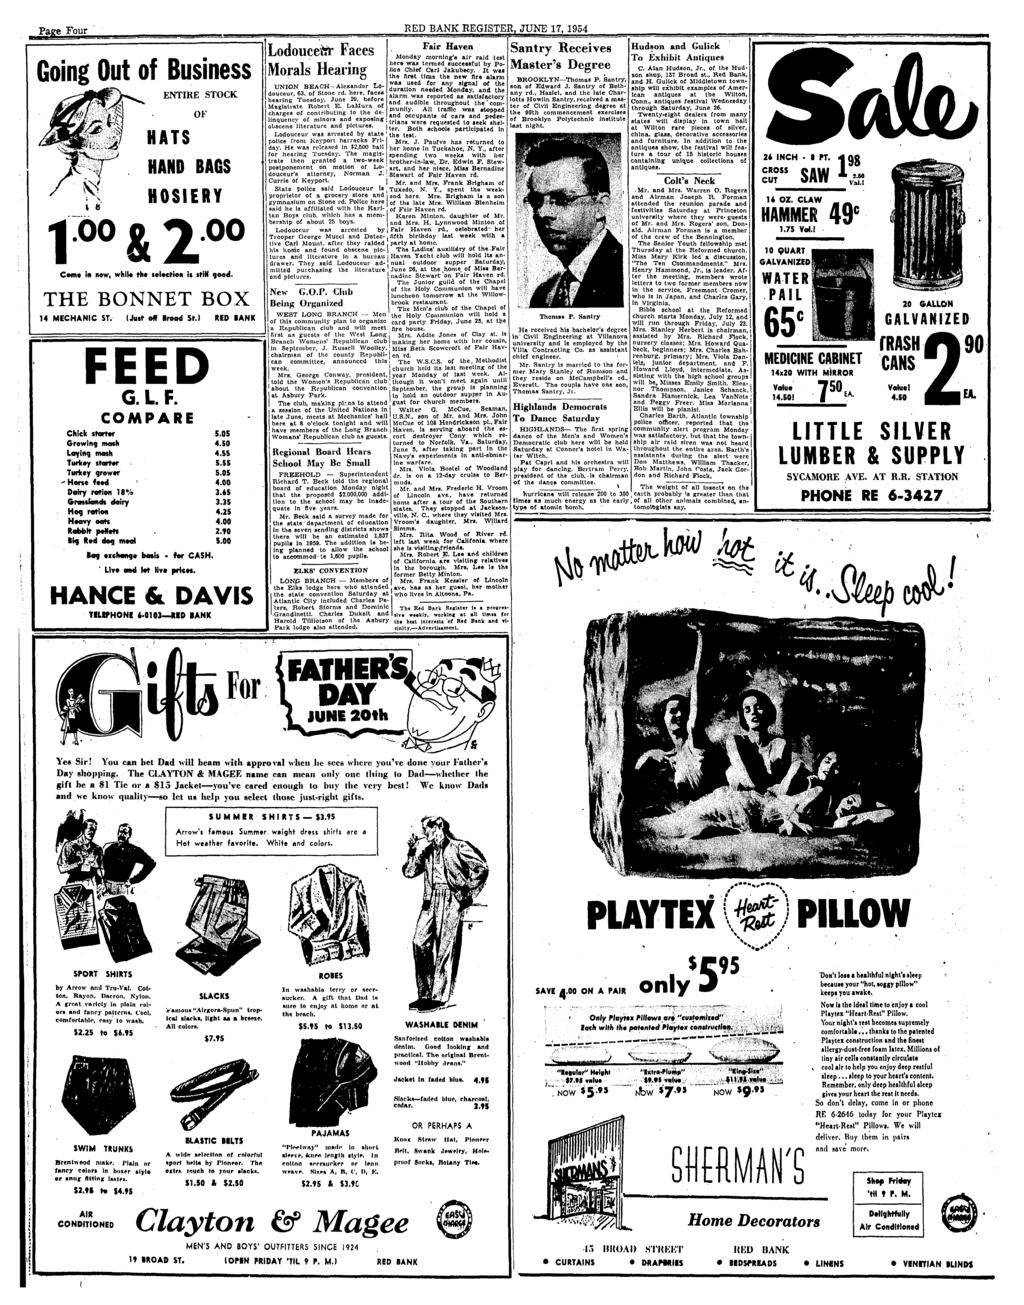 Page Four RED BANK REGISTER, JUNE 17, 1954 Going Out of Business ENTIRE STOCK HATS OF HAND BAGS HOSIERY &2 00 Comt in new, whiu rht selection it stin good. THE BONNET BOX 14 MECHANIC ST.